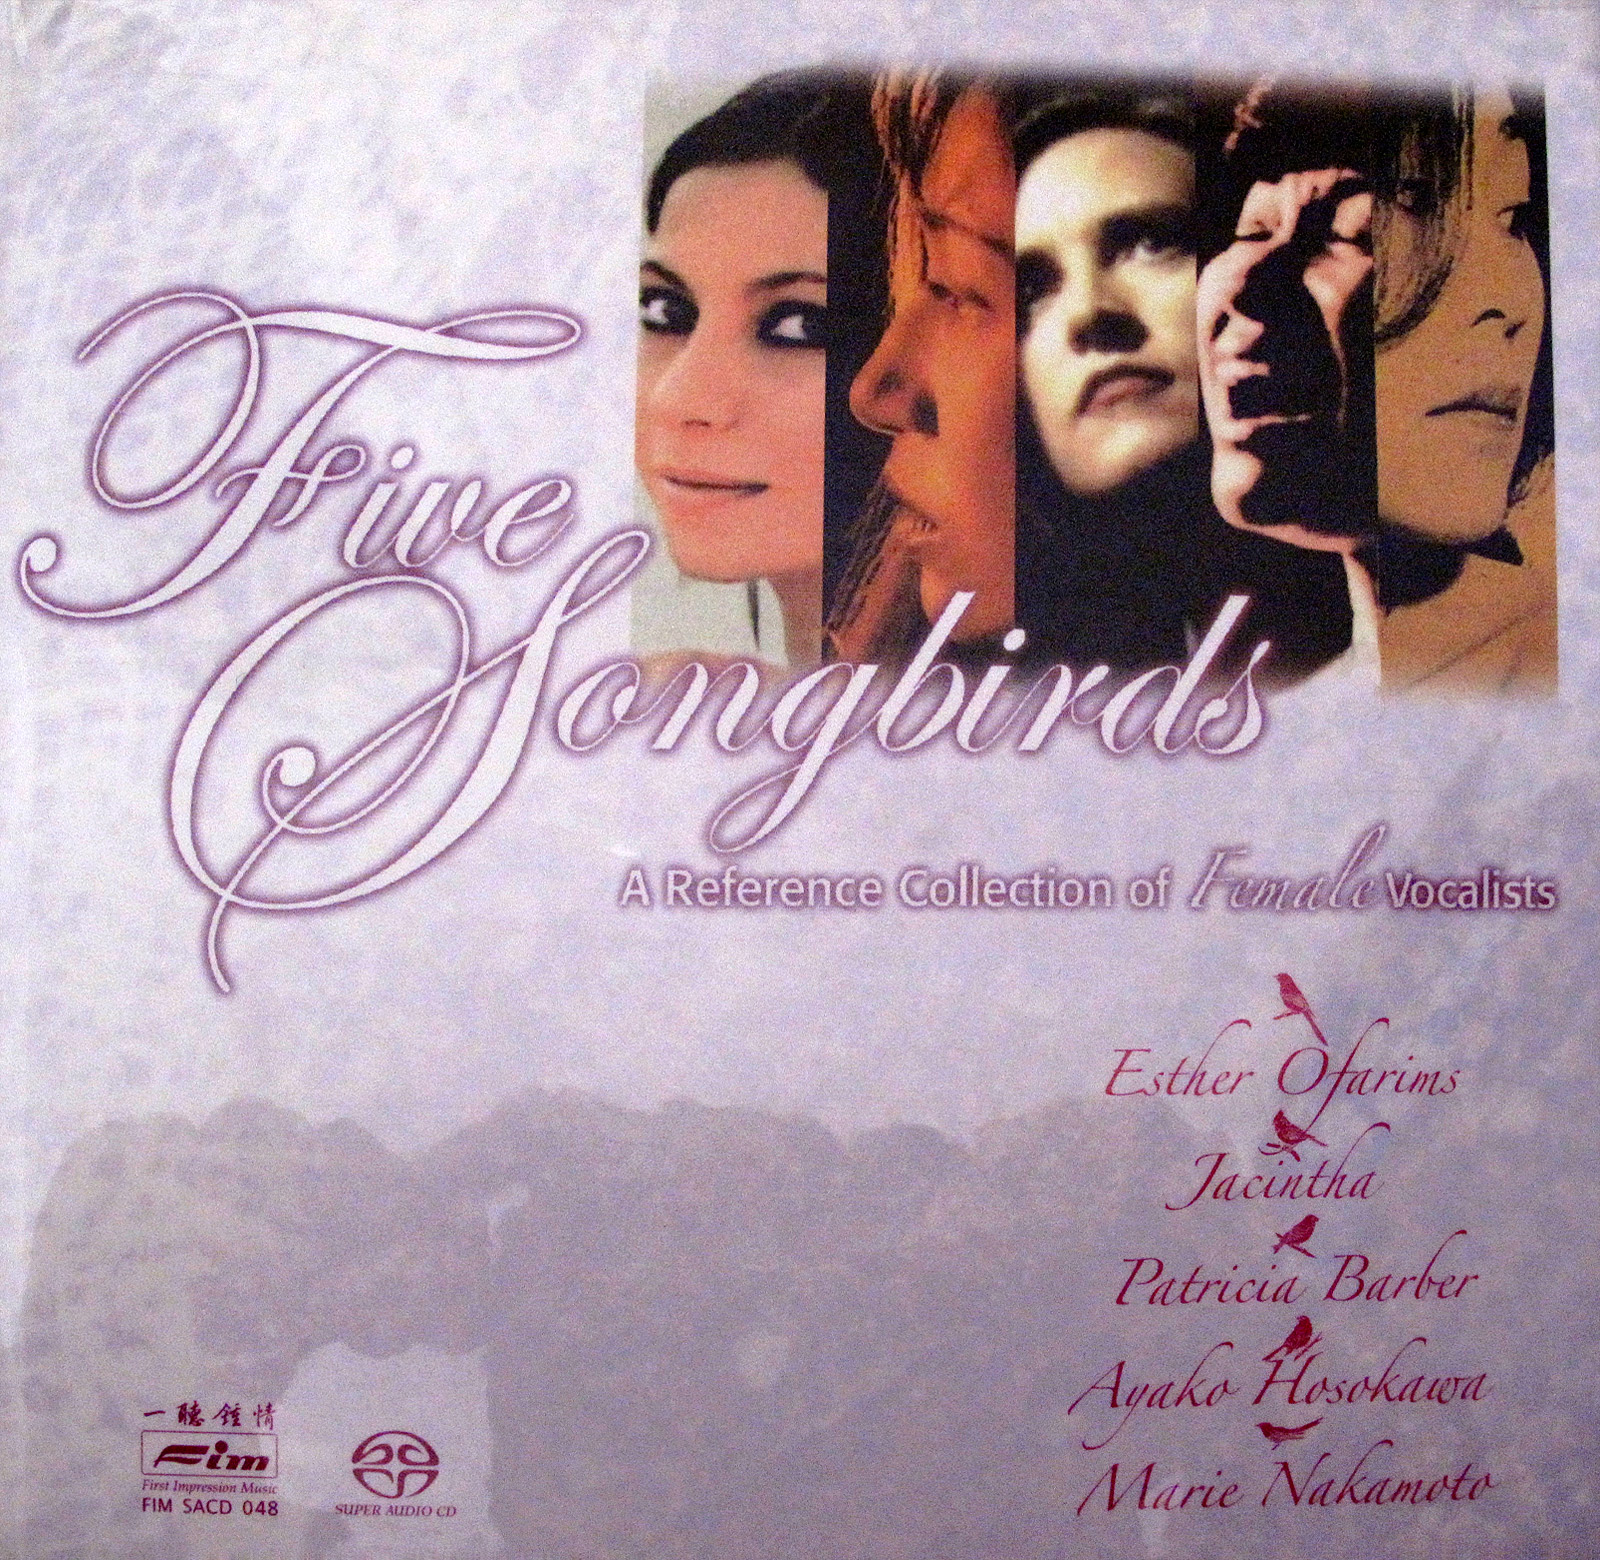 Various Artists – Five Songbirds: A Reference Collection Of Female Vocalists (2004) SACD ISO + Hi-Res FLAC